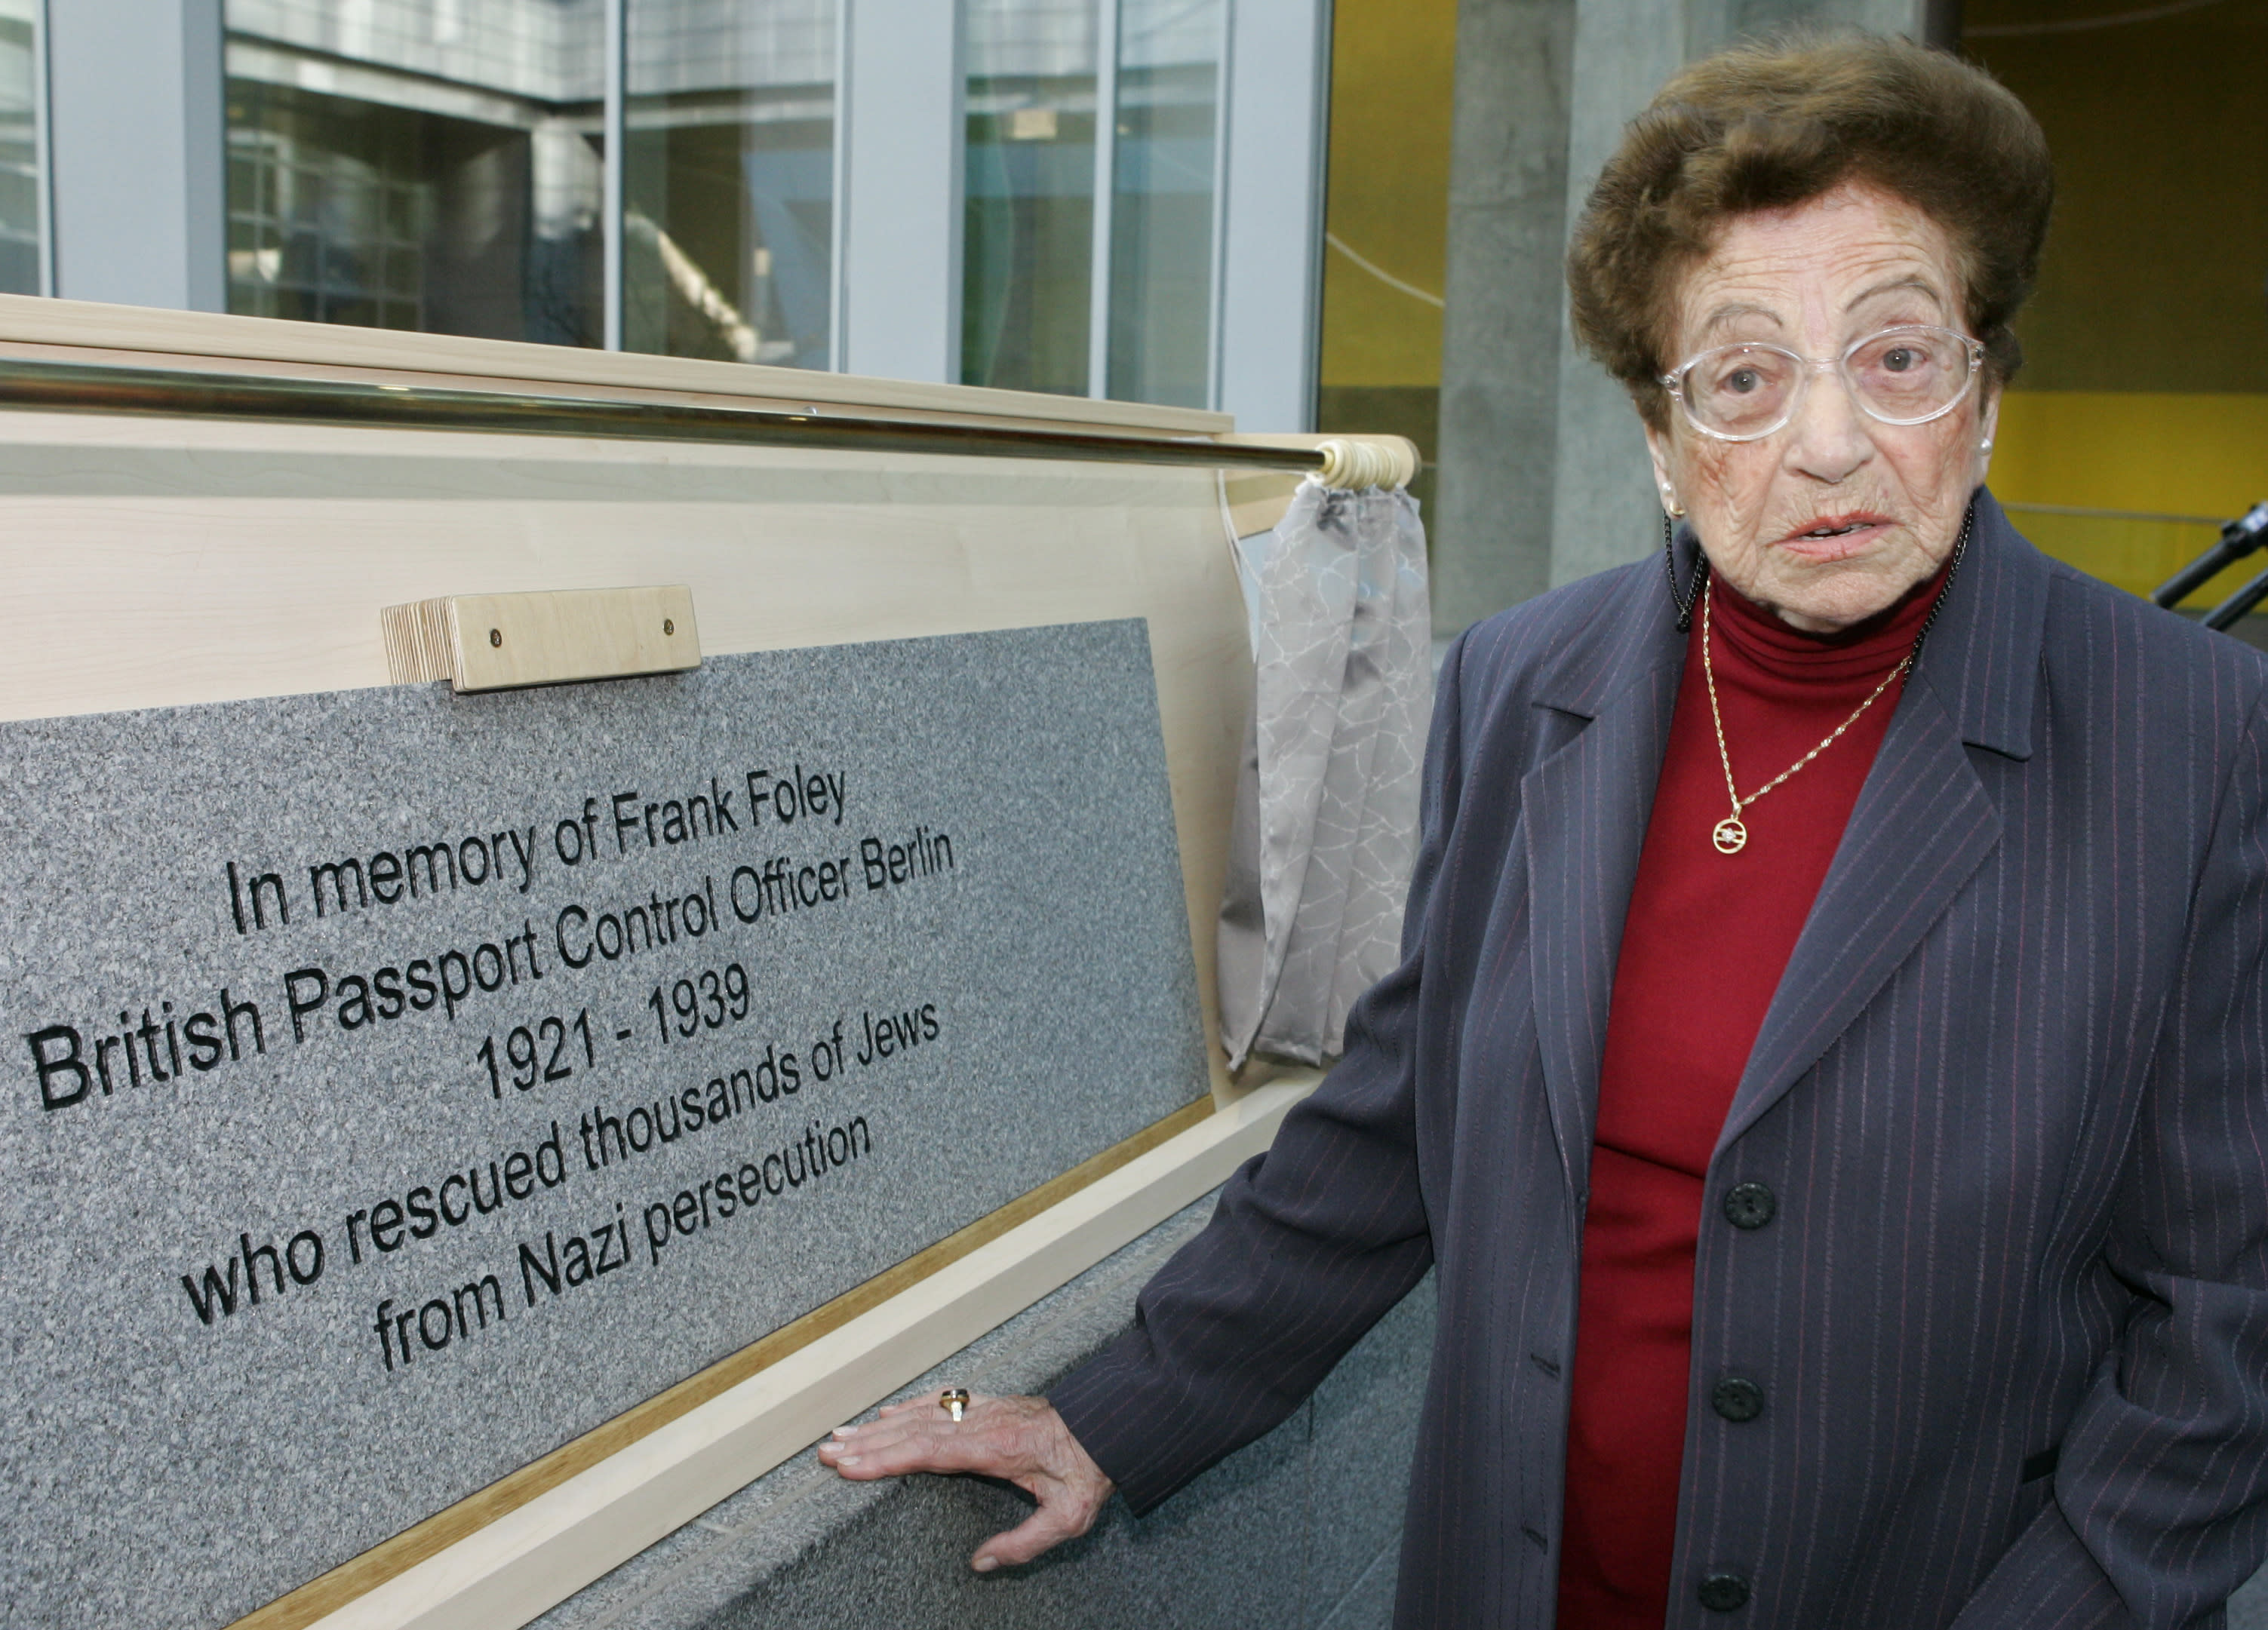 Elisheva Lernau, a Jewish refugee, stands next to a plaque commemorating Frank Foley at the British embassy in Berlin November 24, 2004 (Reuters)